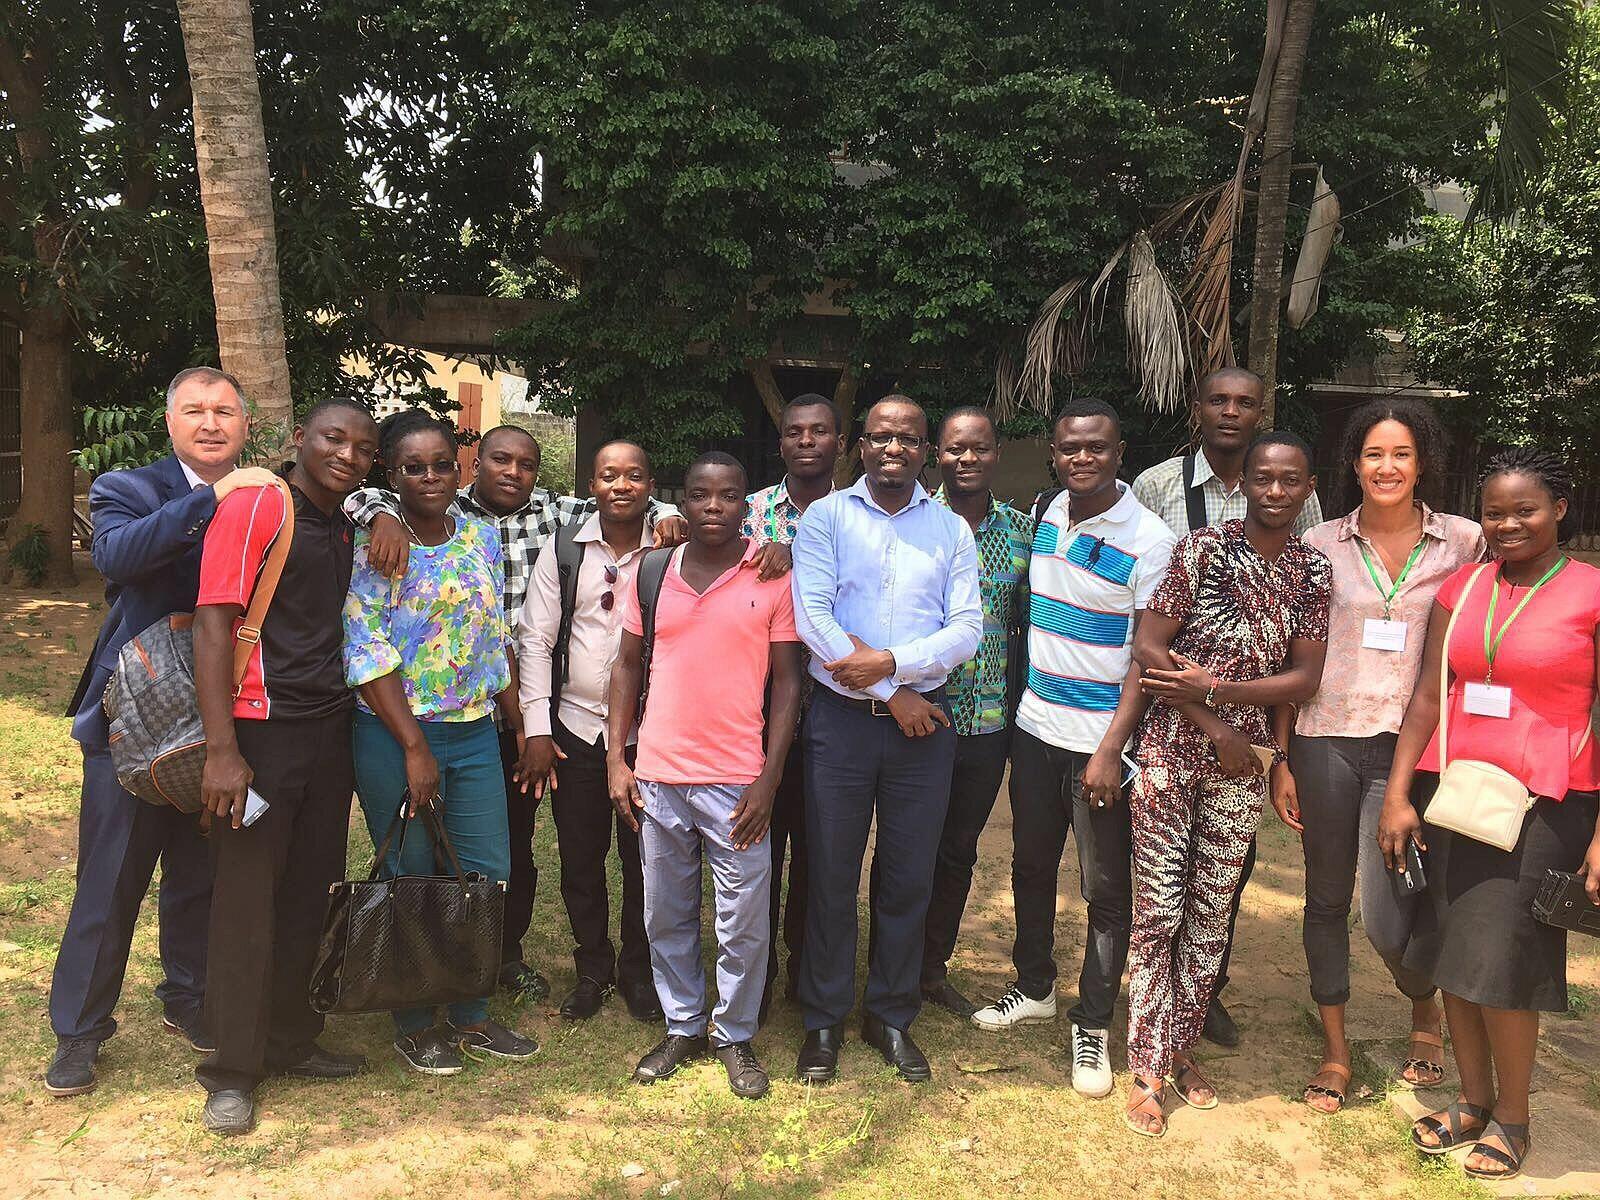 The data collection team and CMNH staff in Lomé, Togo